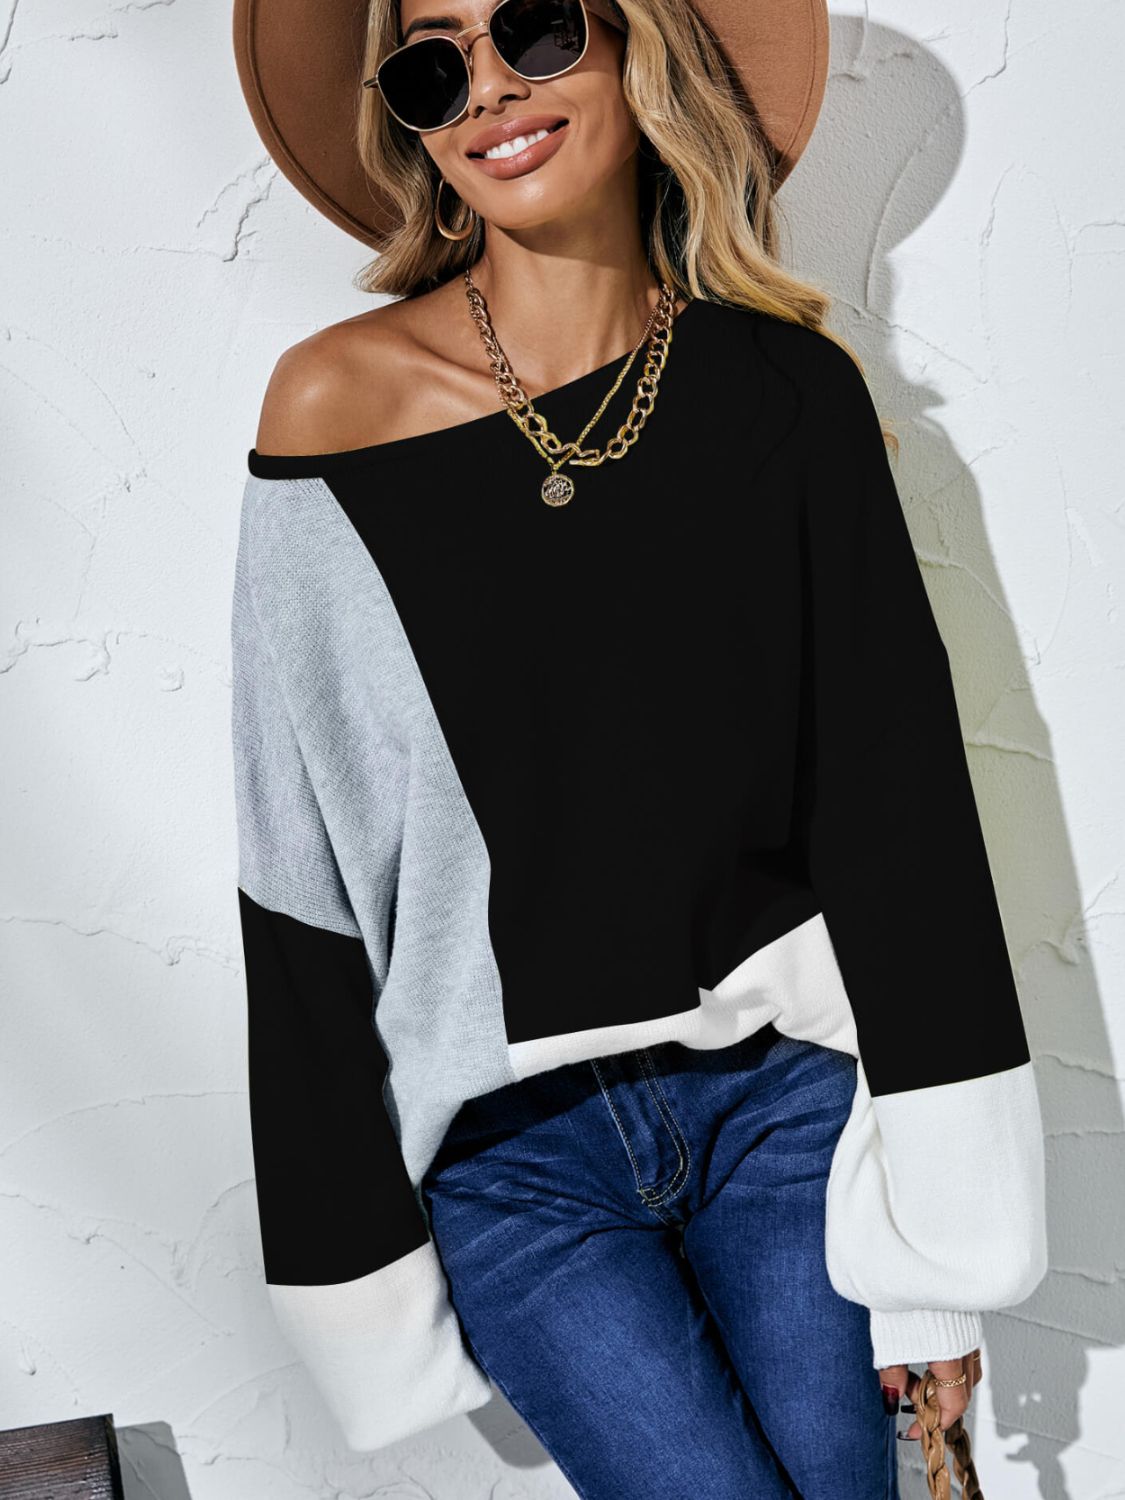 Color Block Balloon Sleeve Boat Neck Sweater